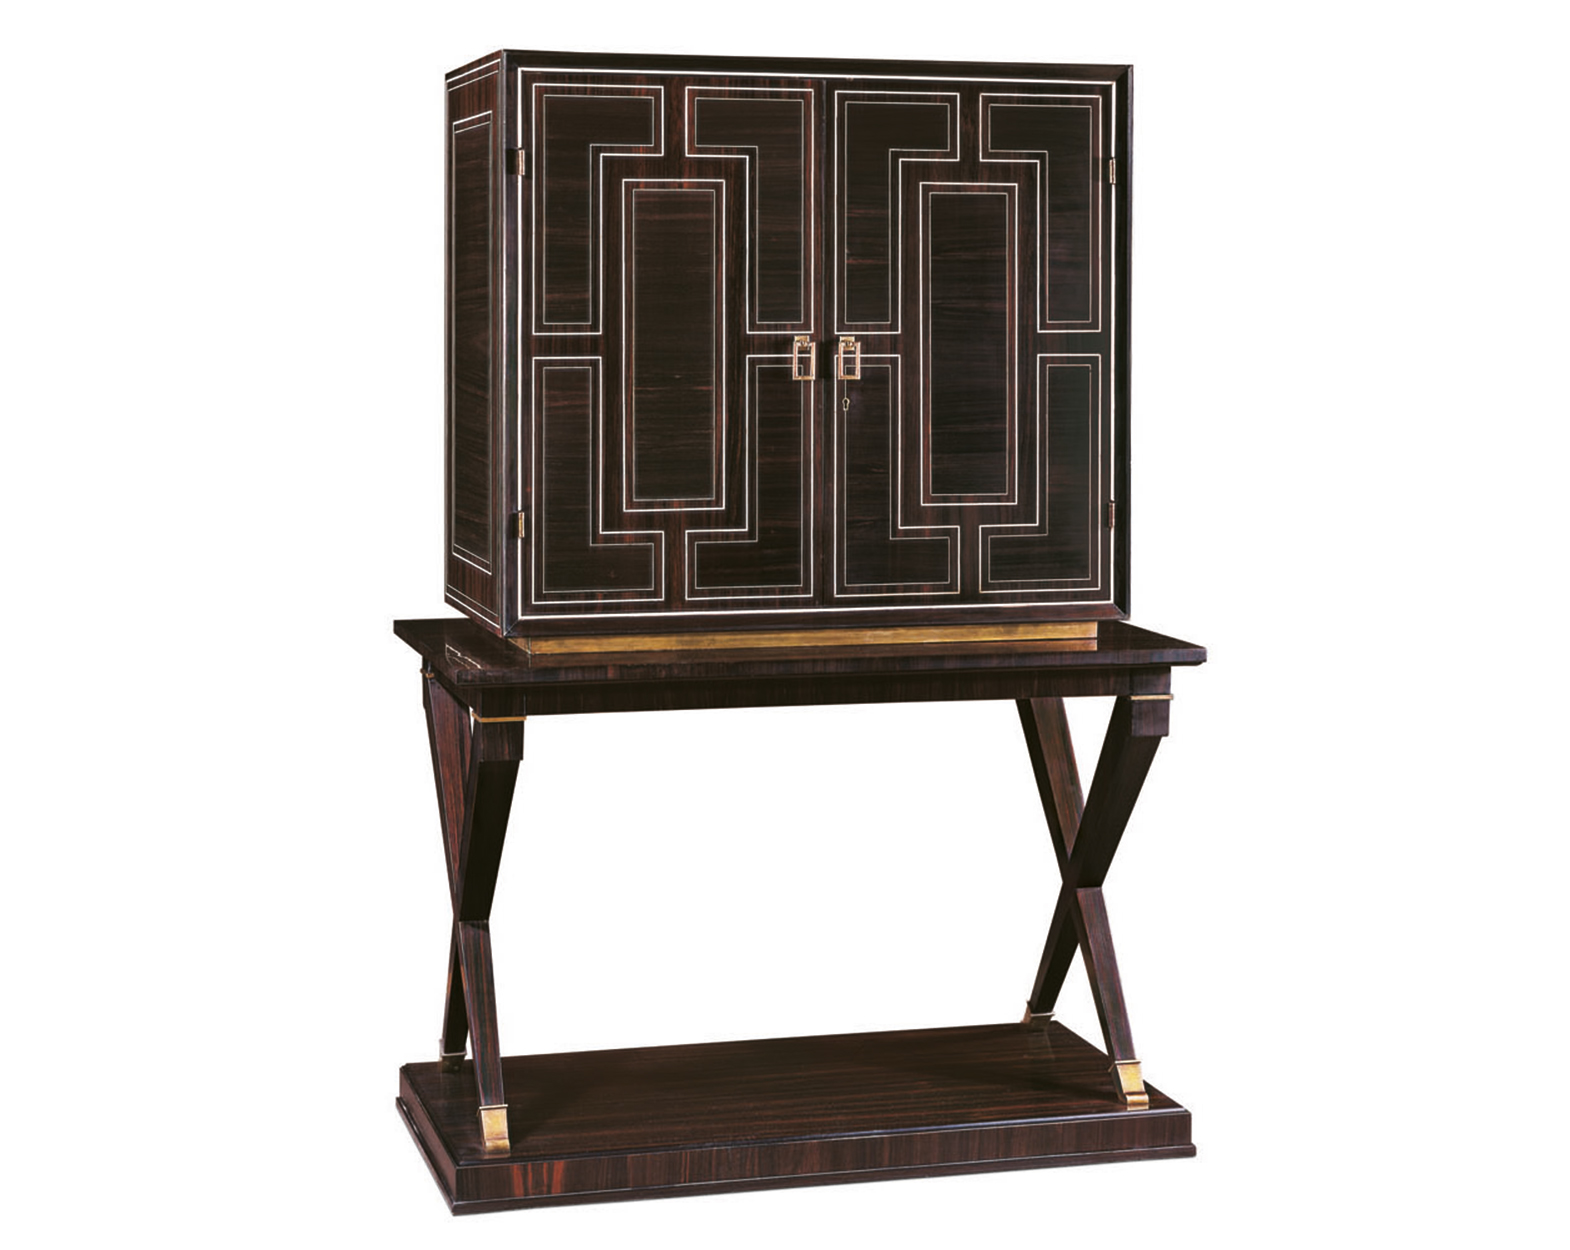 BAZAINE II CABINET ON STAND